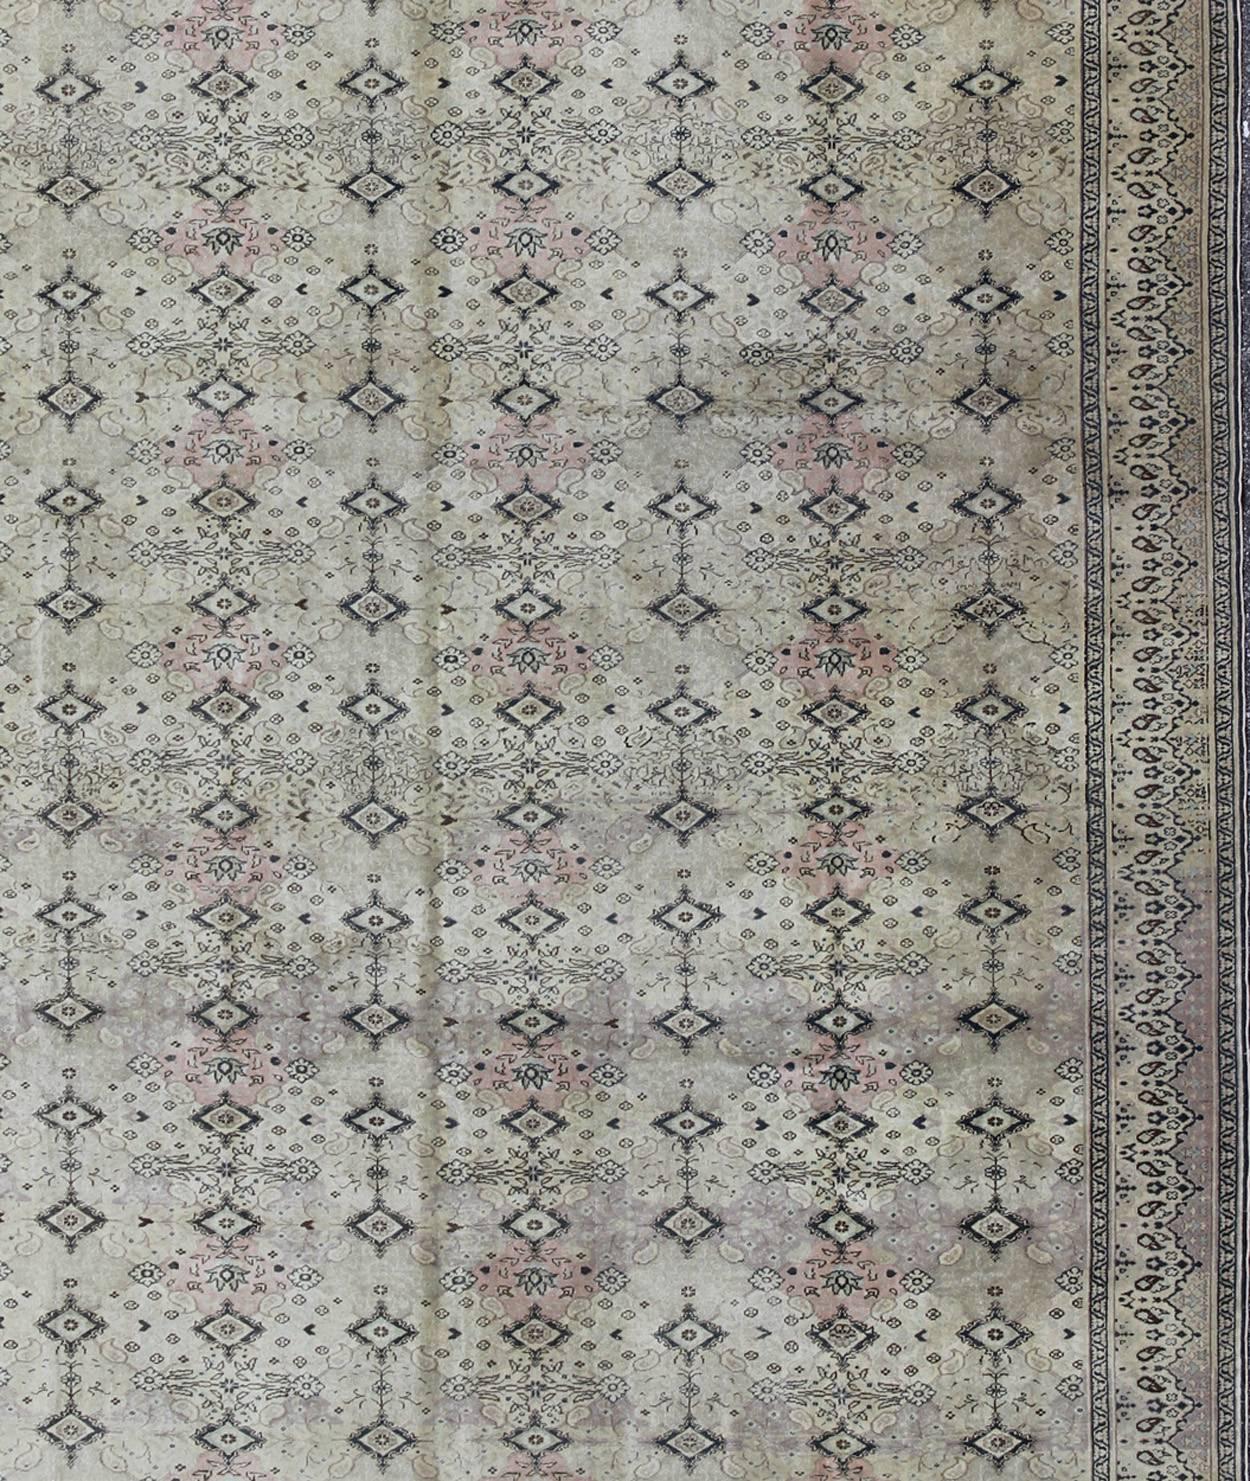 Hand-Knotted Large Turkish Sivas Rug with Repeating Diamond Motifs Set on Ivory Ground For Sale